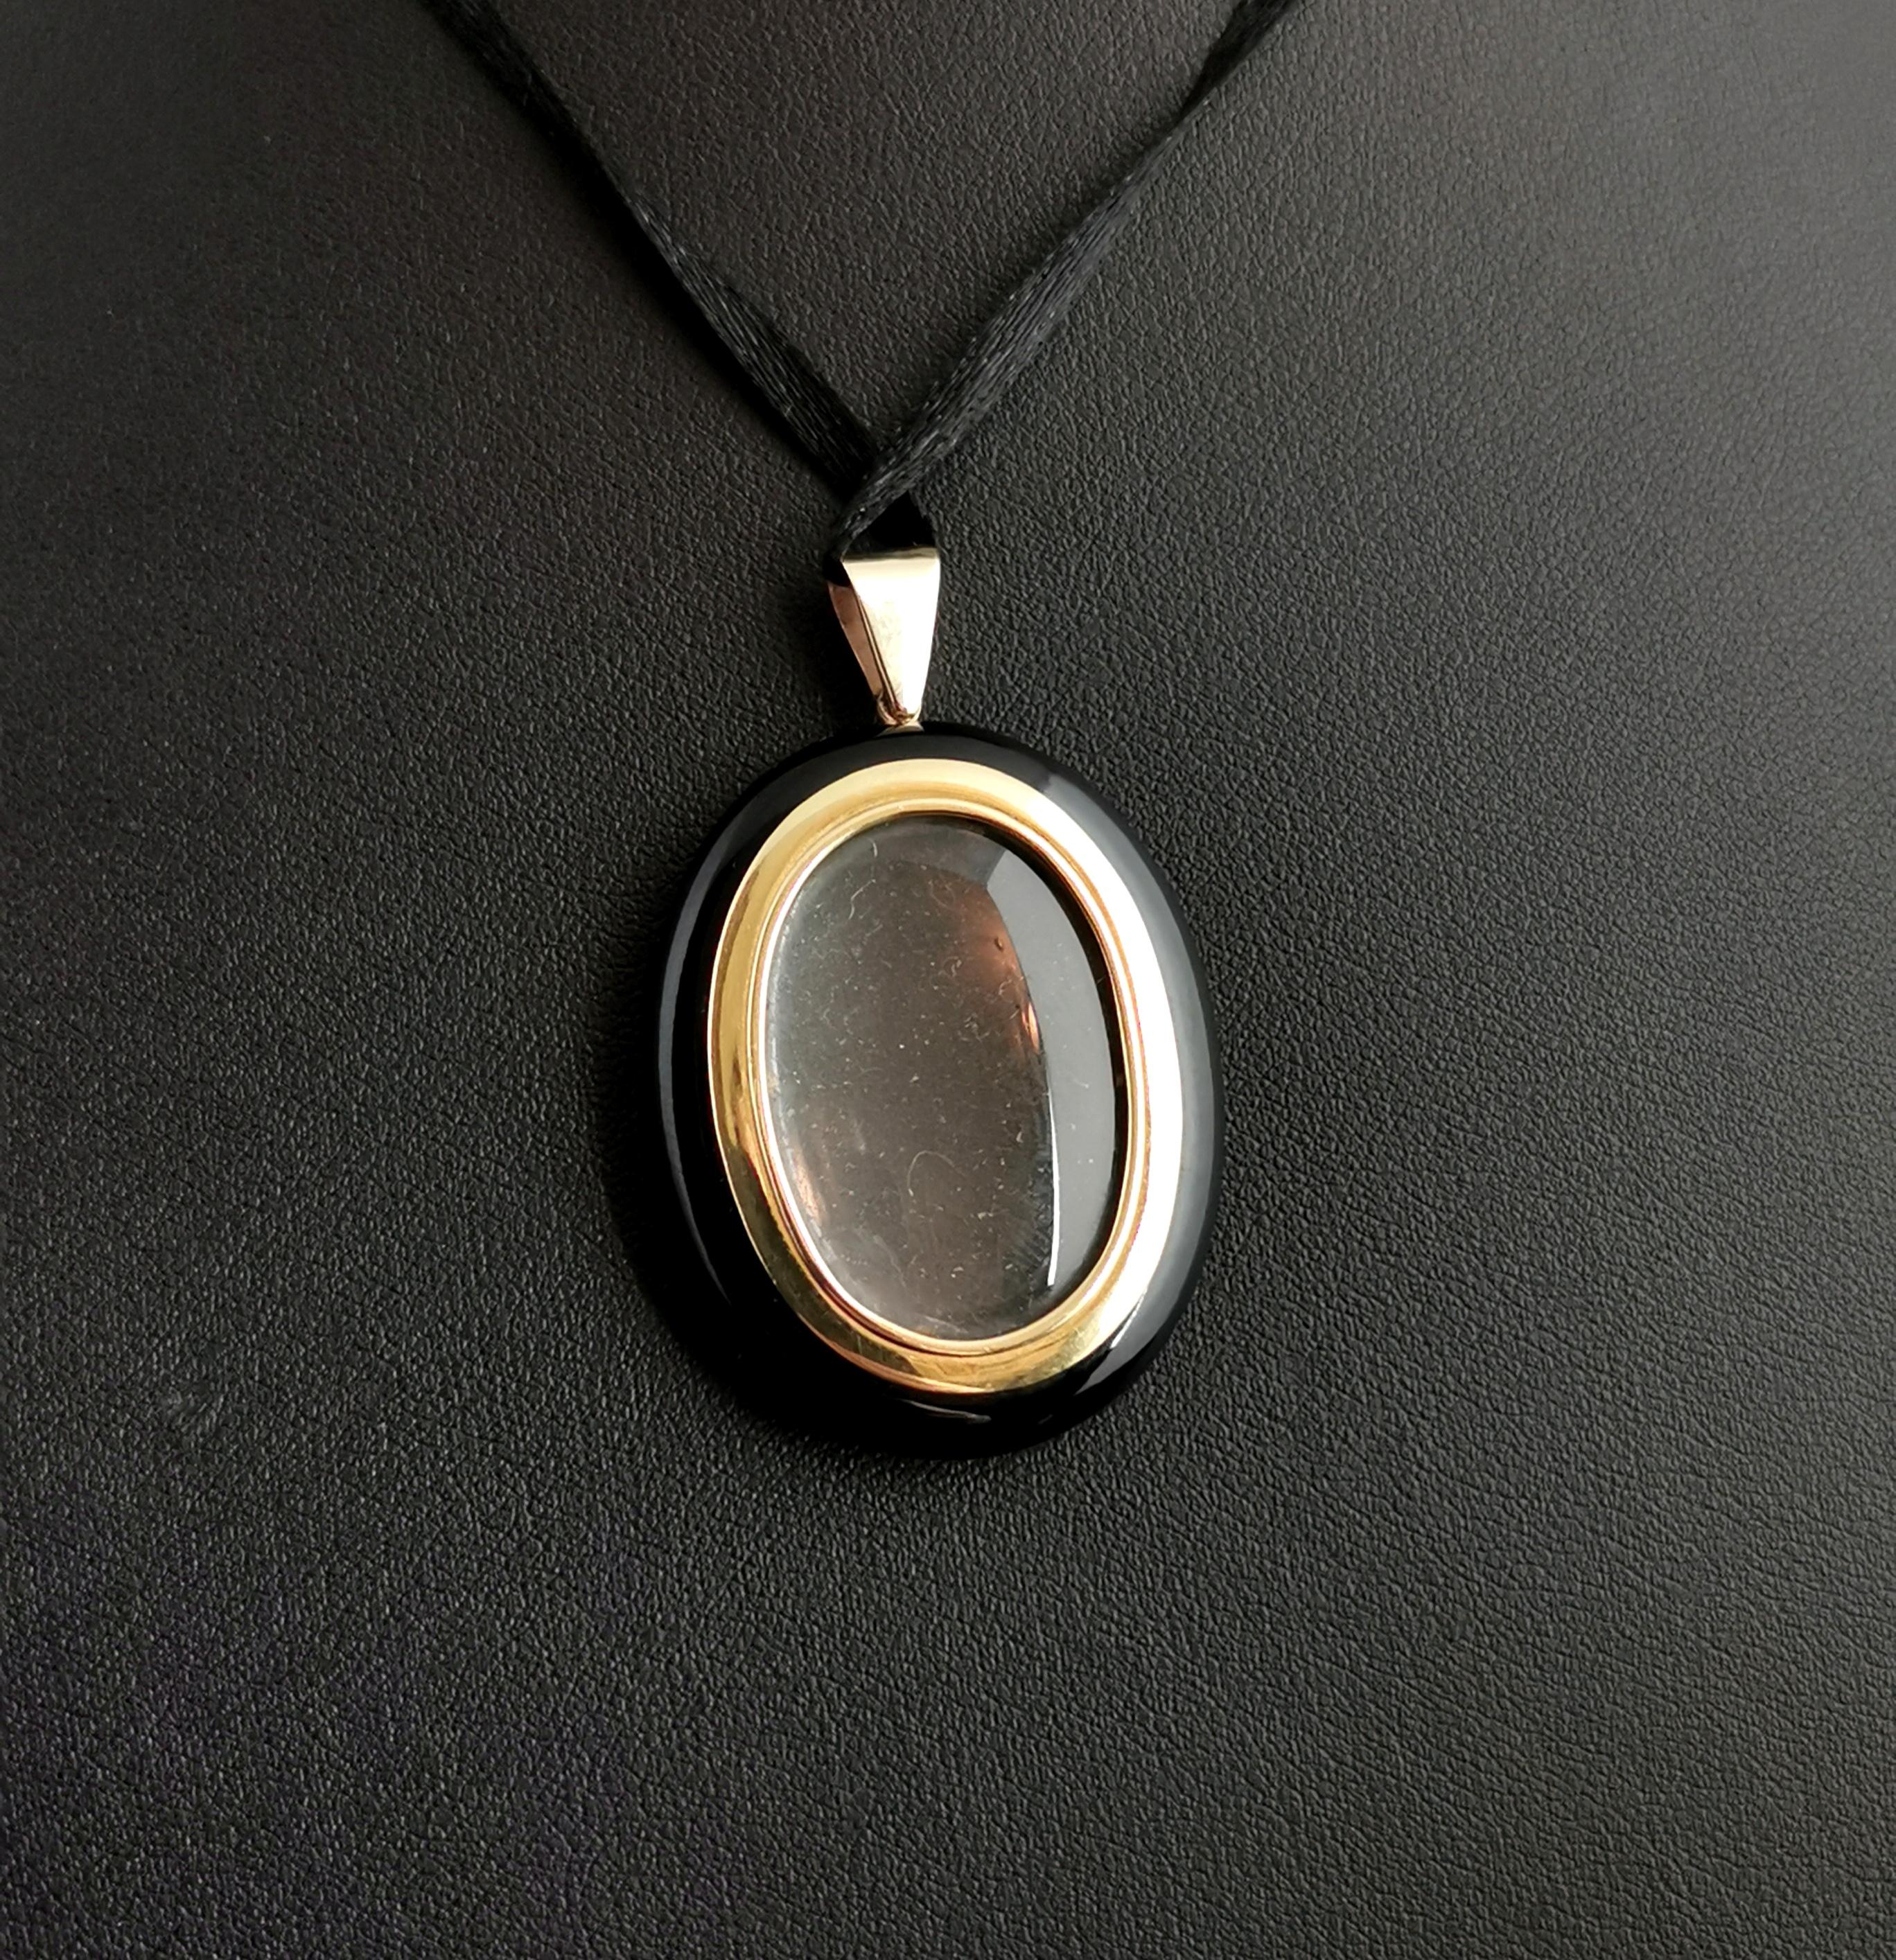 An attractive antique Victorian onyx mourning locket.

A smooth plain polished, rich inky black onyx locket with a glazed compartment to the reverse with a 9kt yellow gold frame and a gold bale.

It is simplistic in design but very stylish and